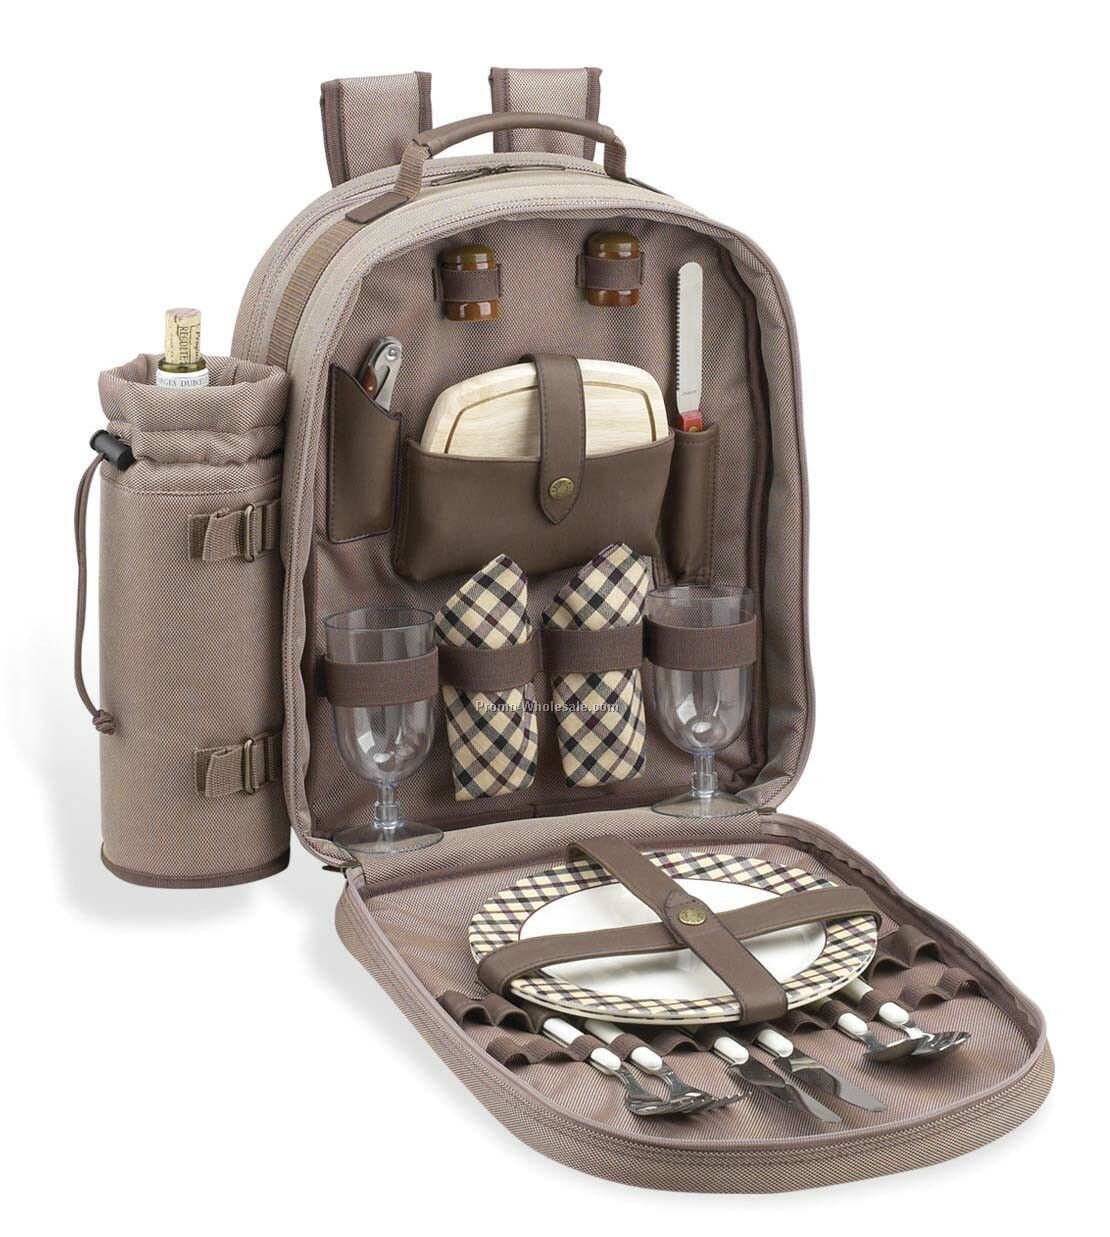 15"x16"x6.5" Picnic Backpack Cooler For Two